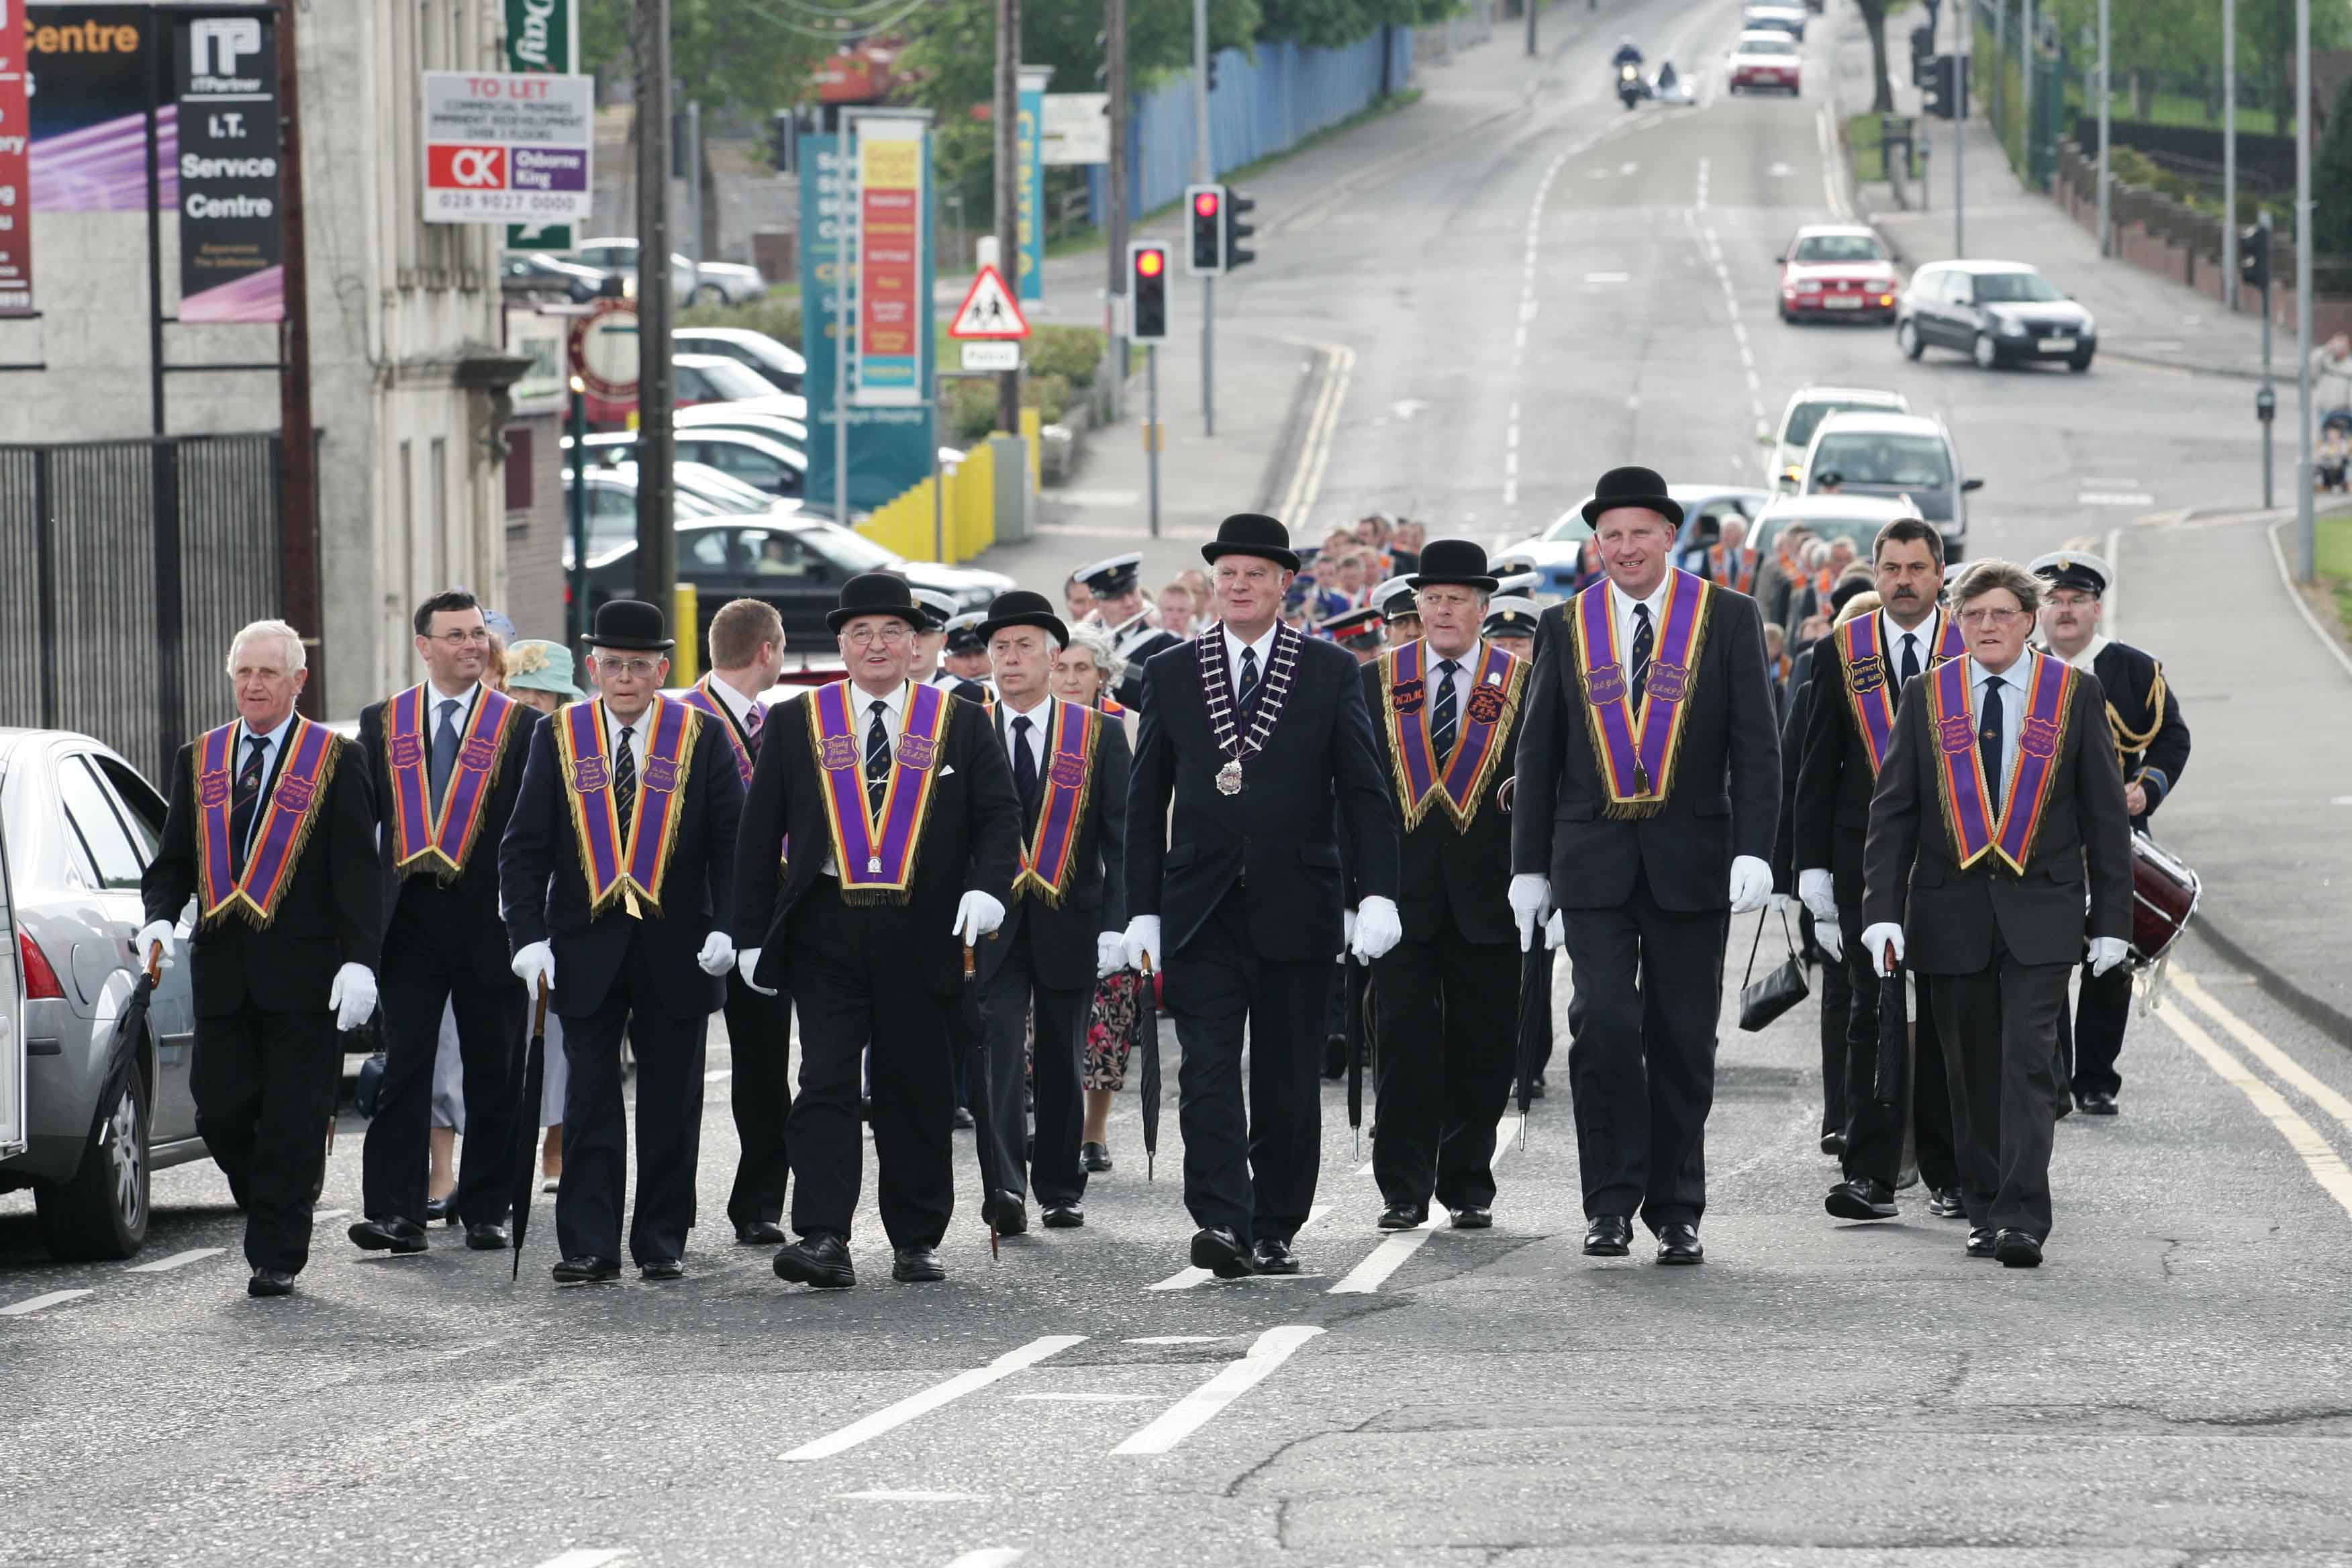 Officers from Banbridge Royal Arch Purple District on parade to Banbridge Baptist Church led by Bro. John Smyth, County Grand Master. 20-41-07.